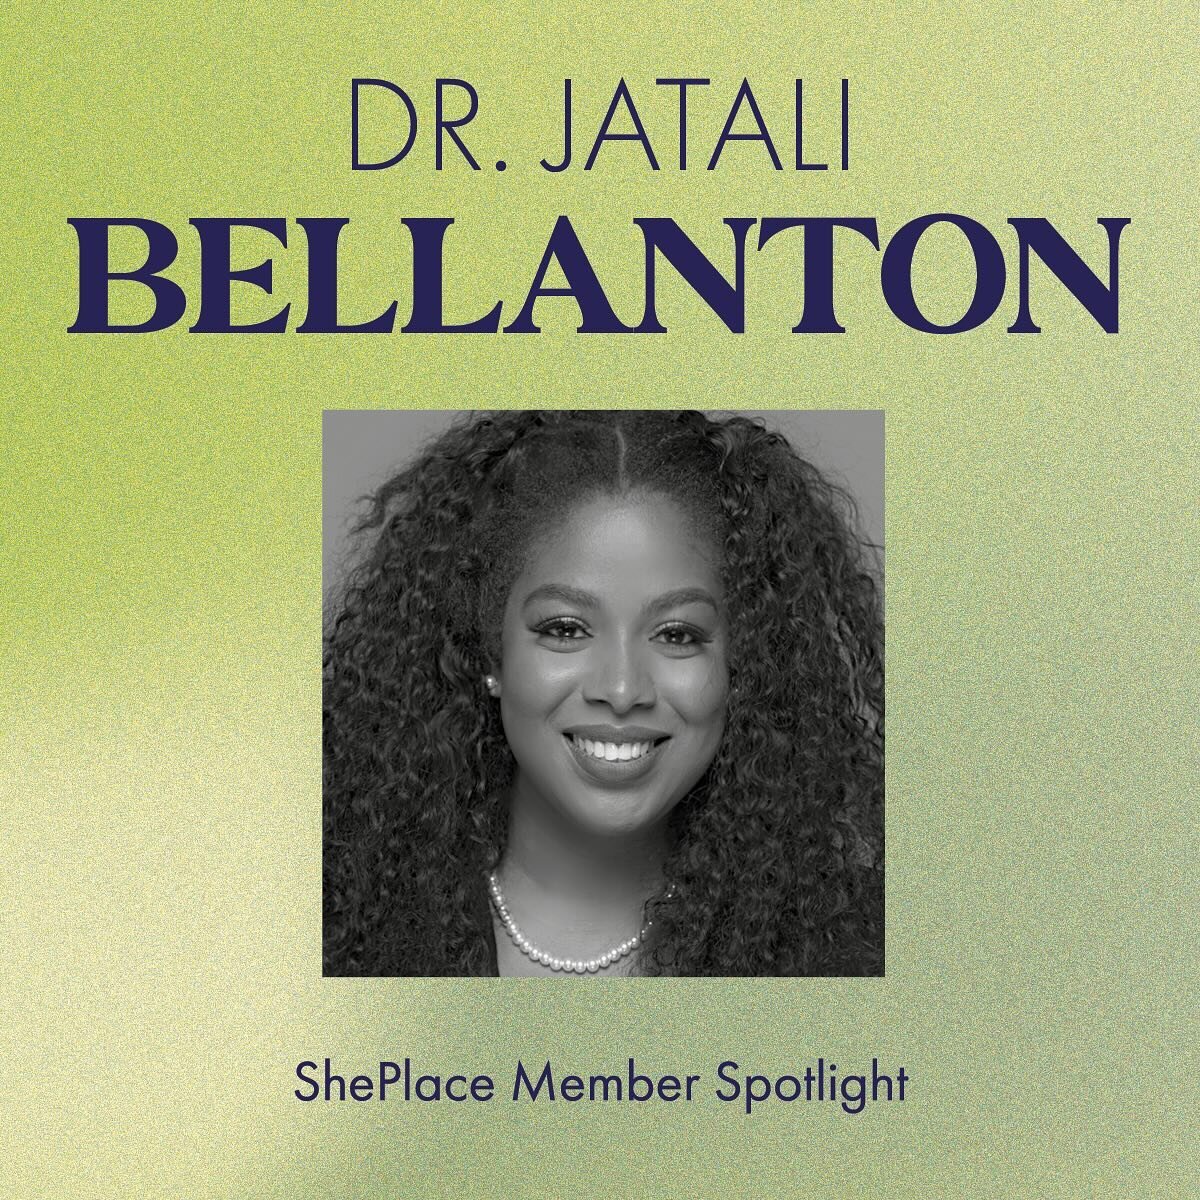 @jatalibellanton is an accredited investor in the USA, UK &amp; Africa markets. Her most recent accomplishments are co-owning a gold mine in Ghana where her team is working on miner rights, creating an education based Crypto Hedge Fund and having inv